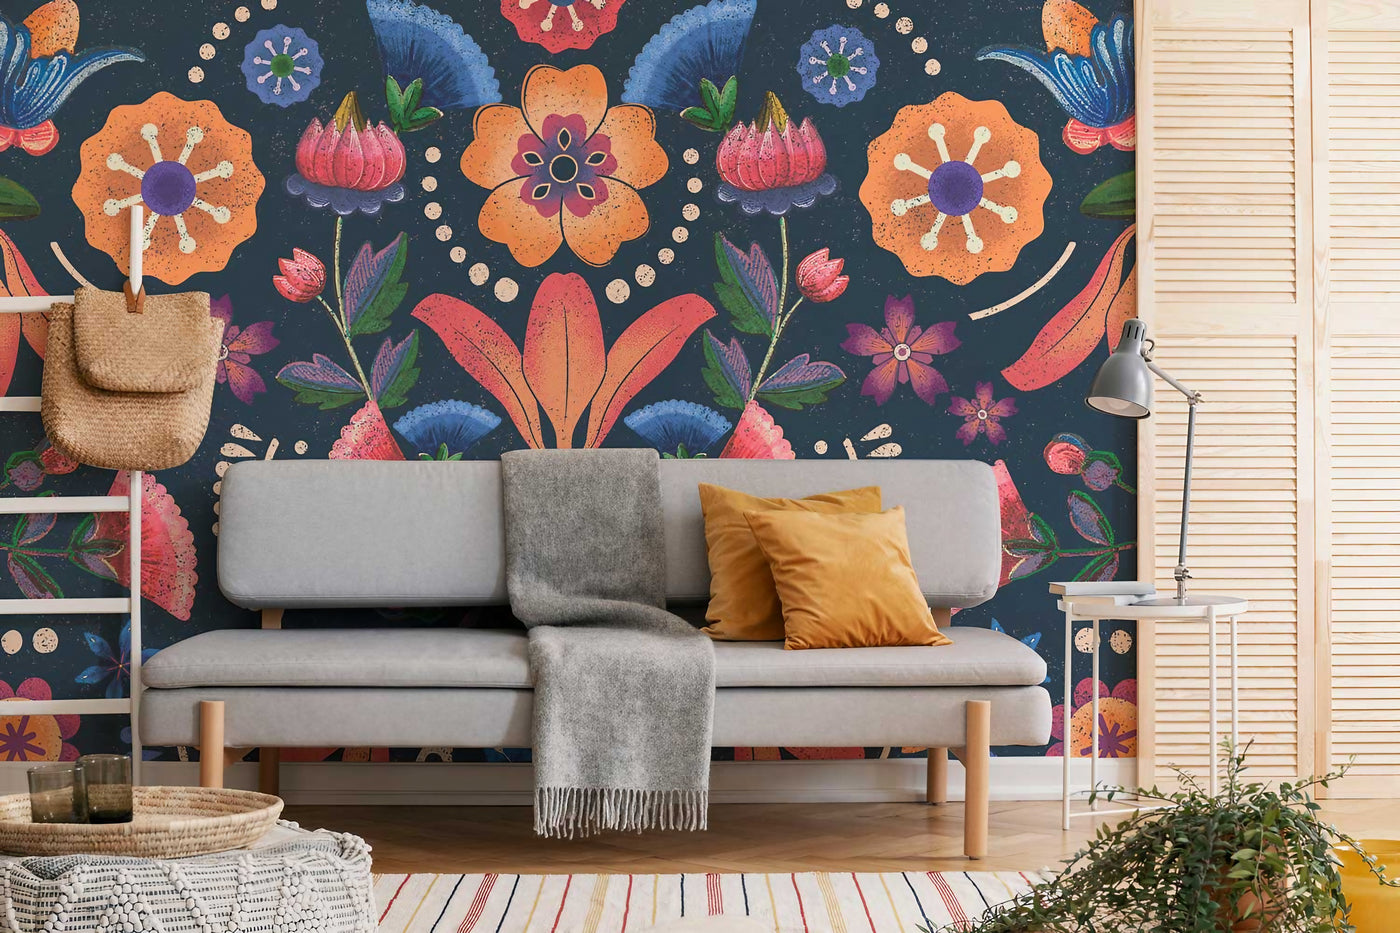 Mexican Ethnic Floral Wallpaper Mural